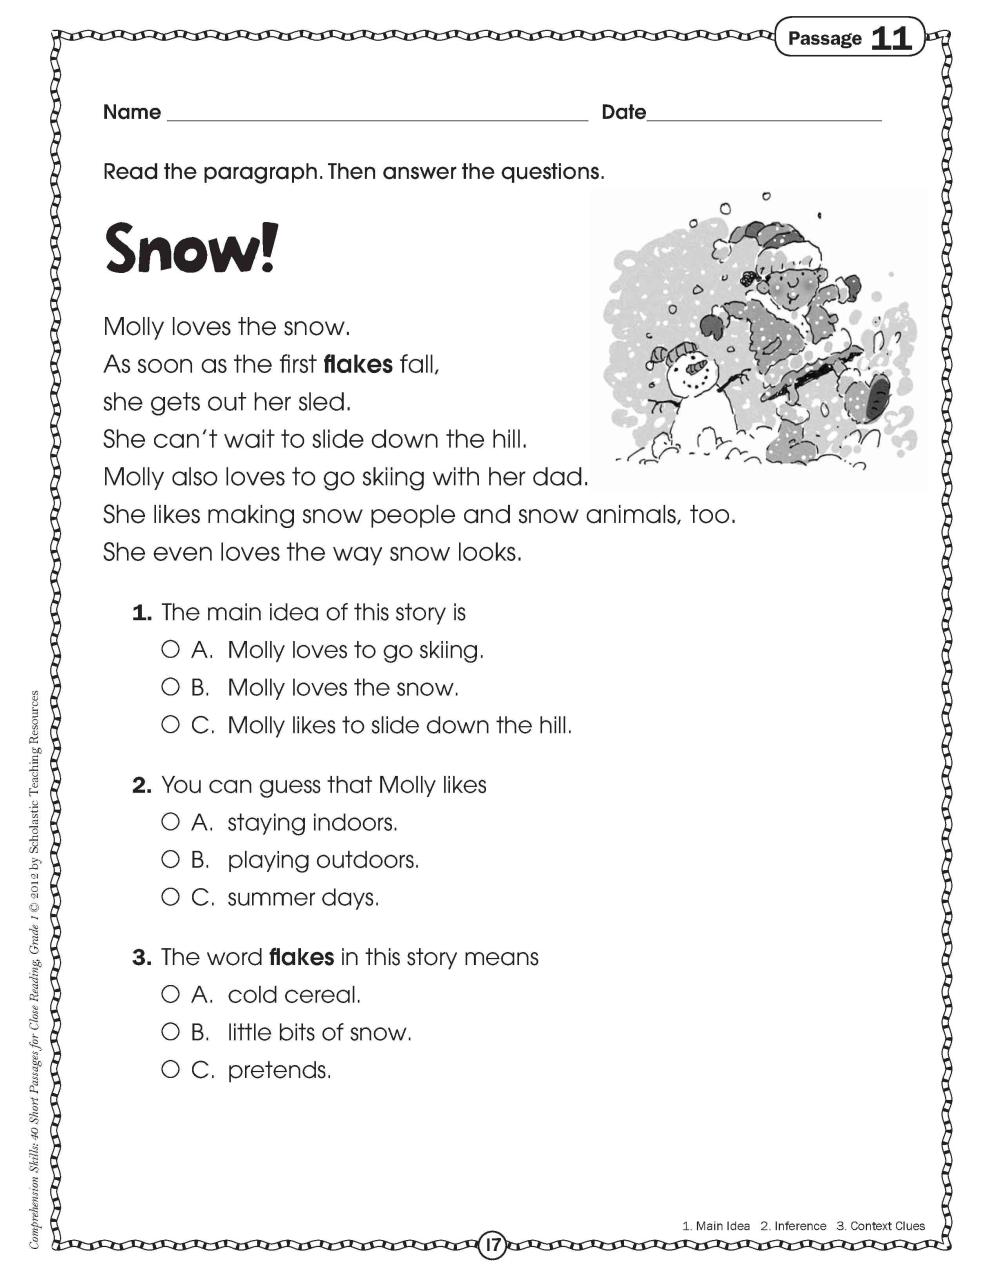 17 Best Images of Close Reading Worksheets Free Elementary Reading